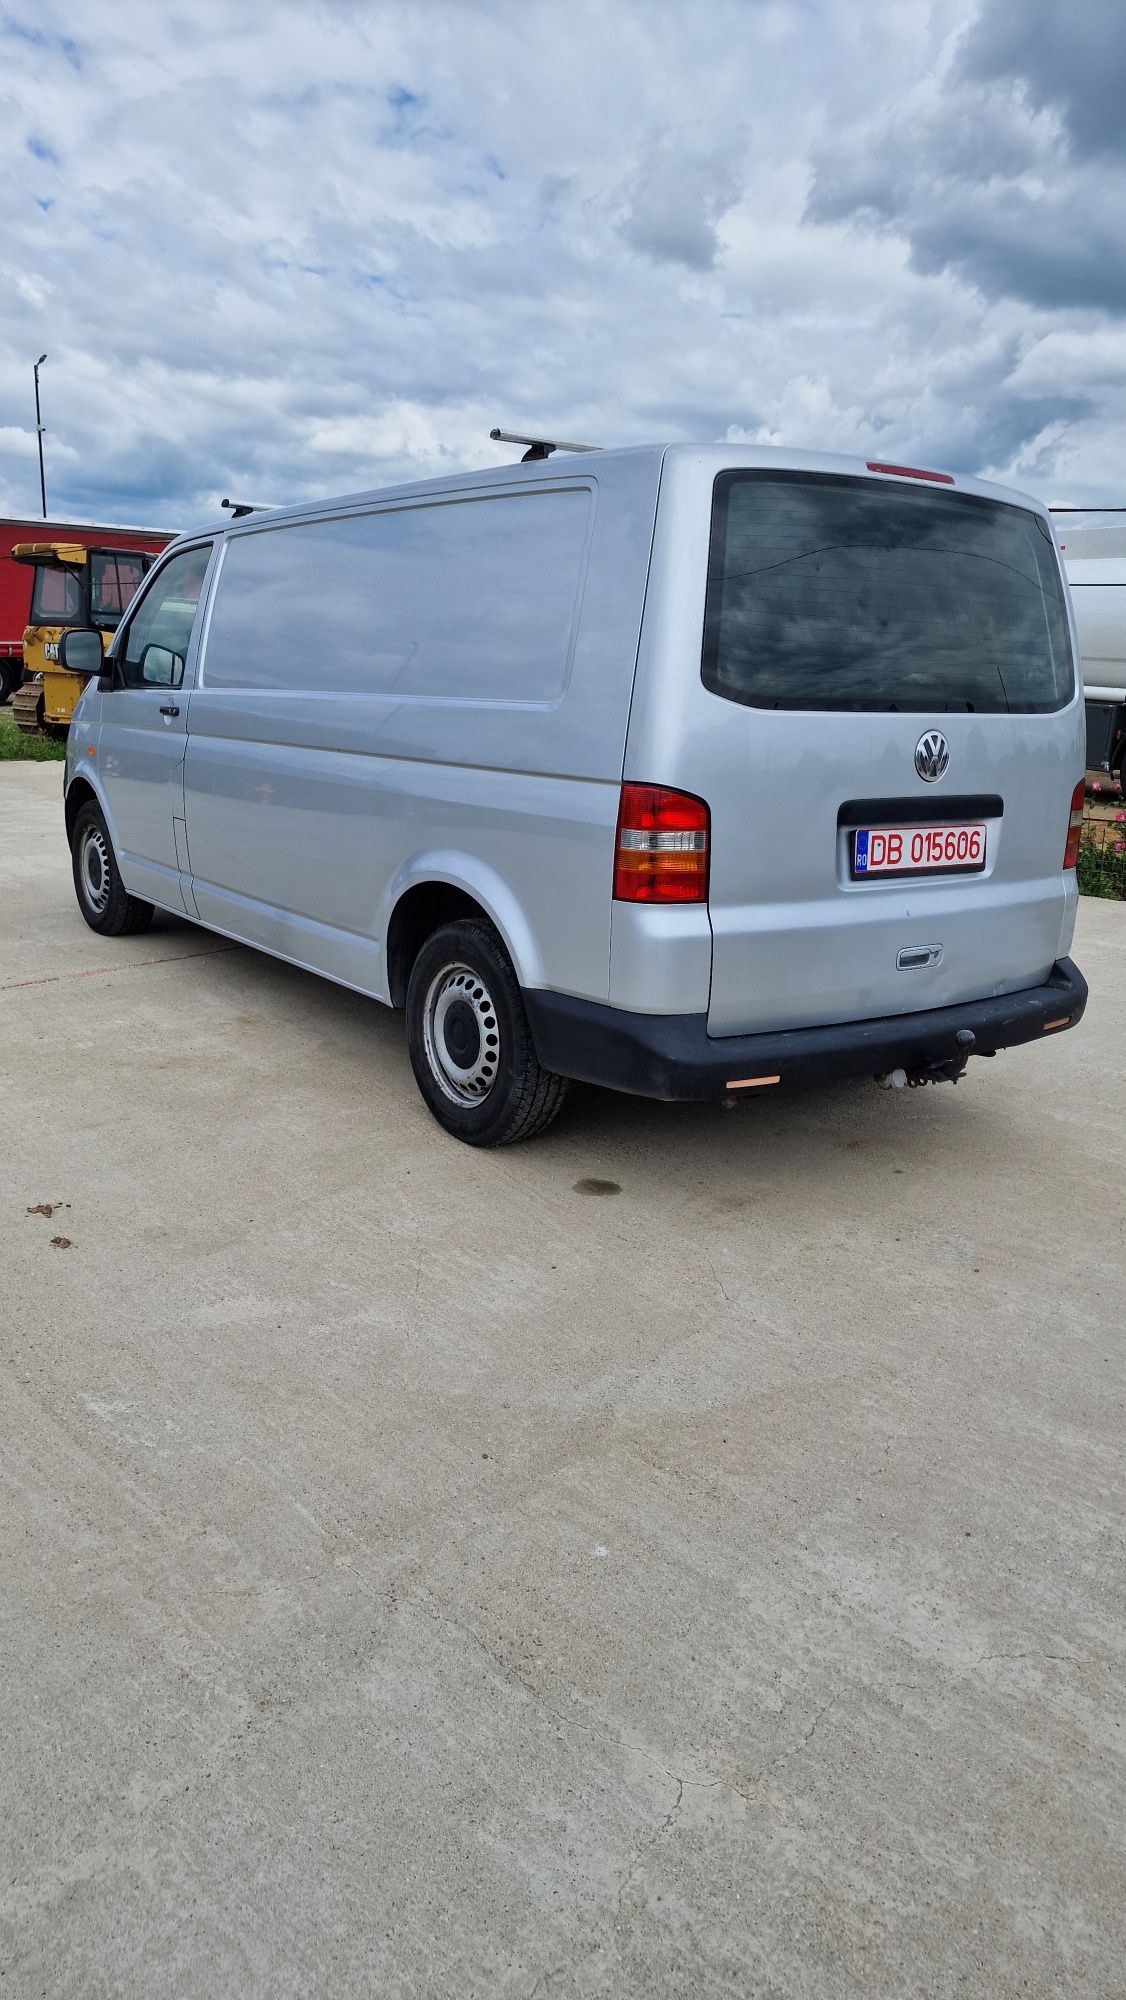 Vw Transporter t5 Lung